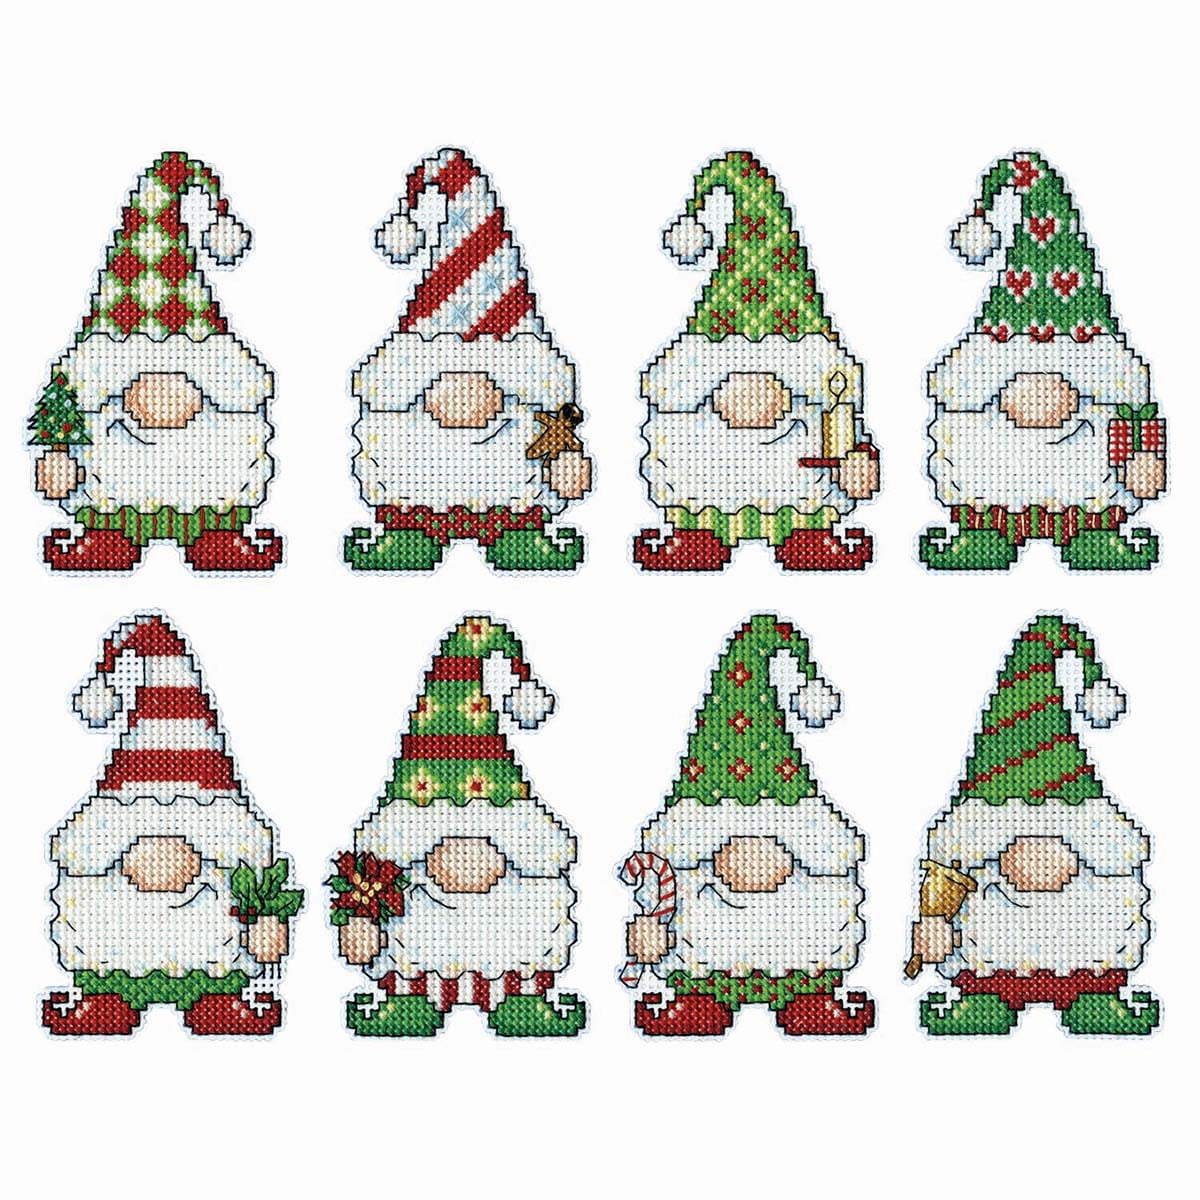 Easy nisse decor Counted embroidery decor Pixel art needlepoint gift Valent...